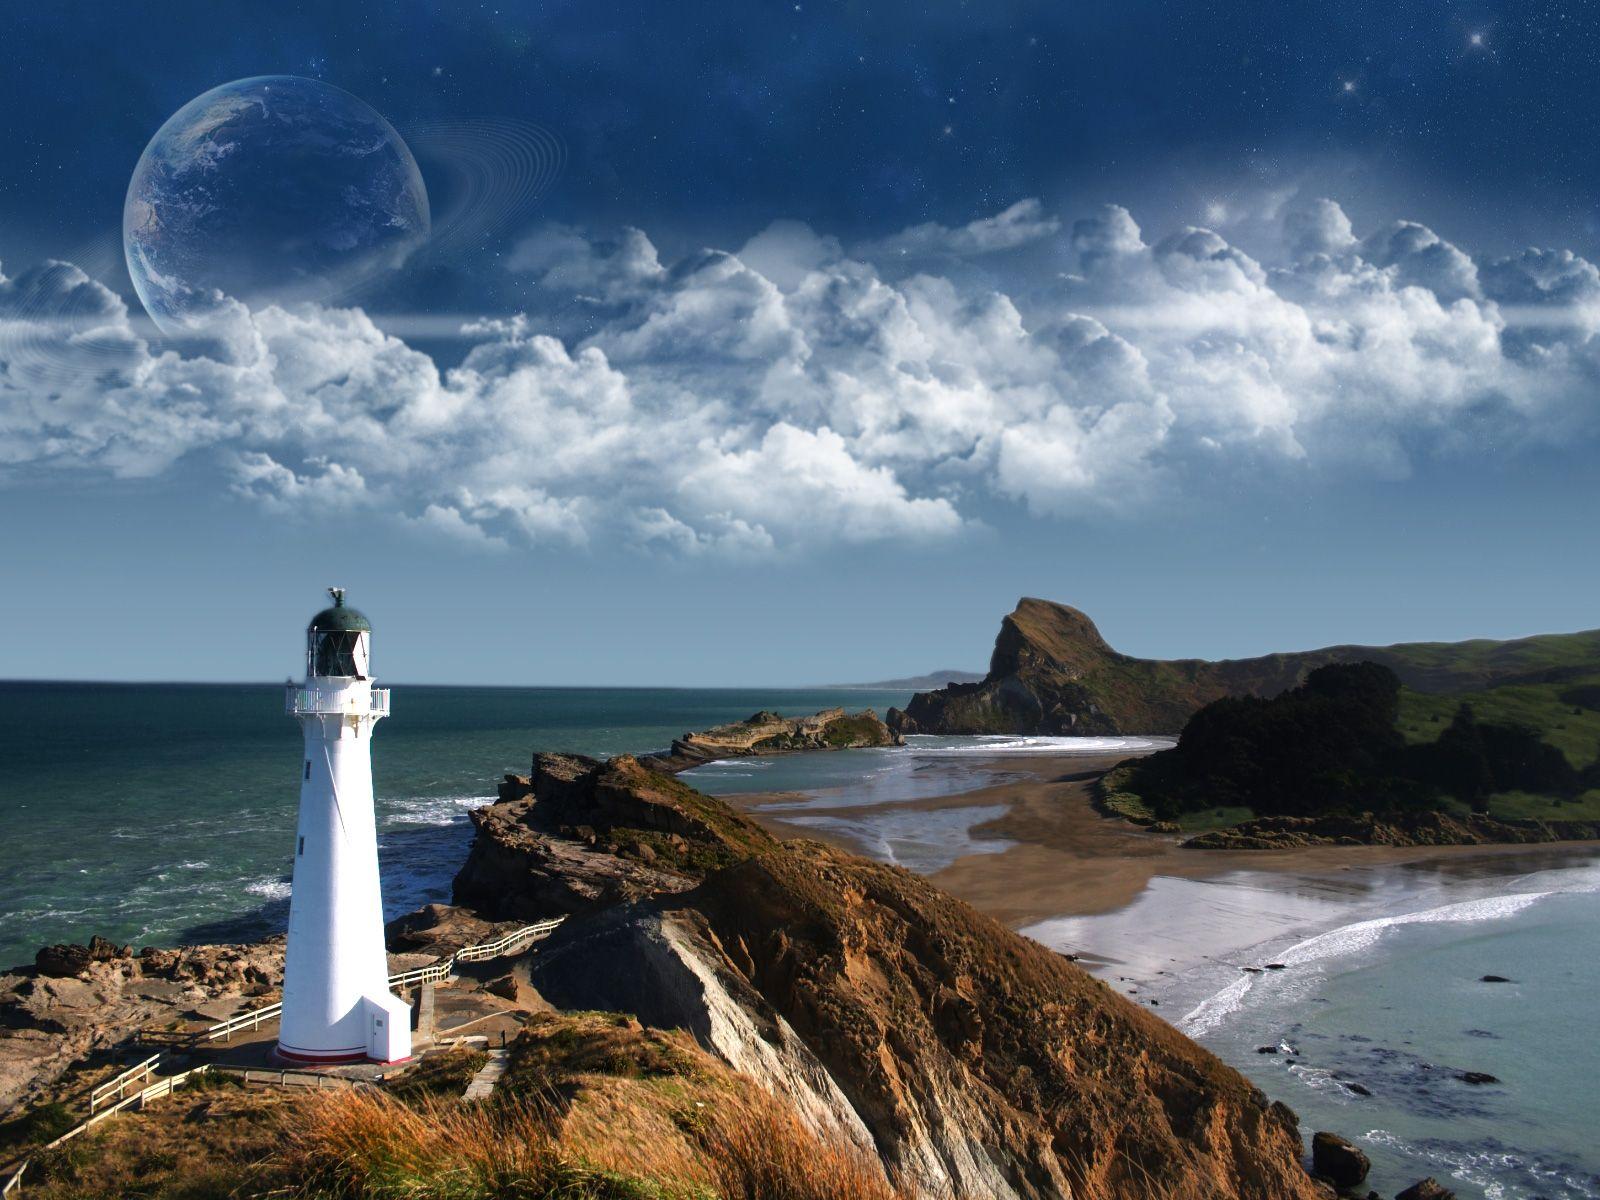 Lighthouse Wallpaper. Lighthouse picture, Beautiful lighthouse